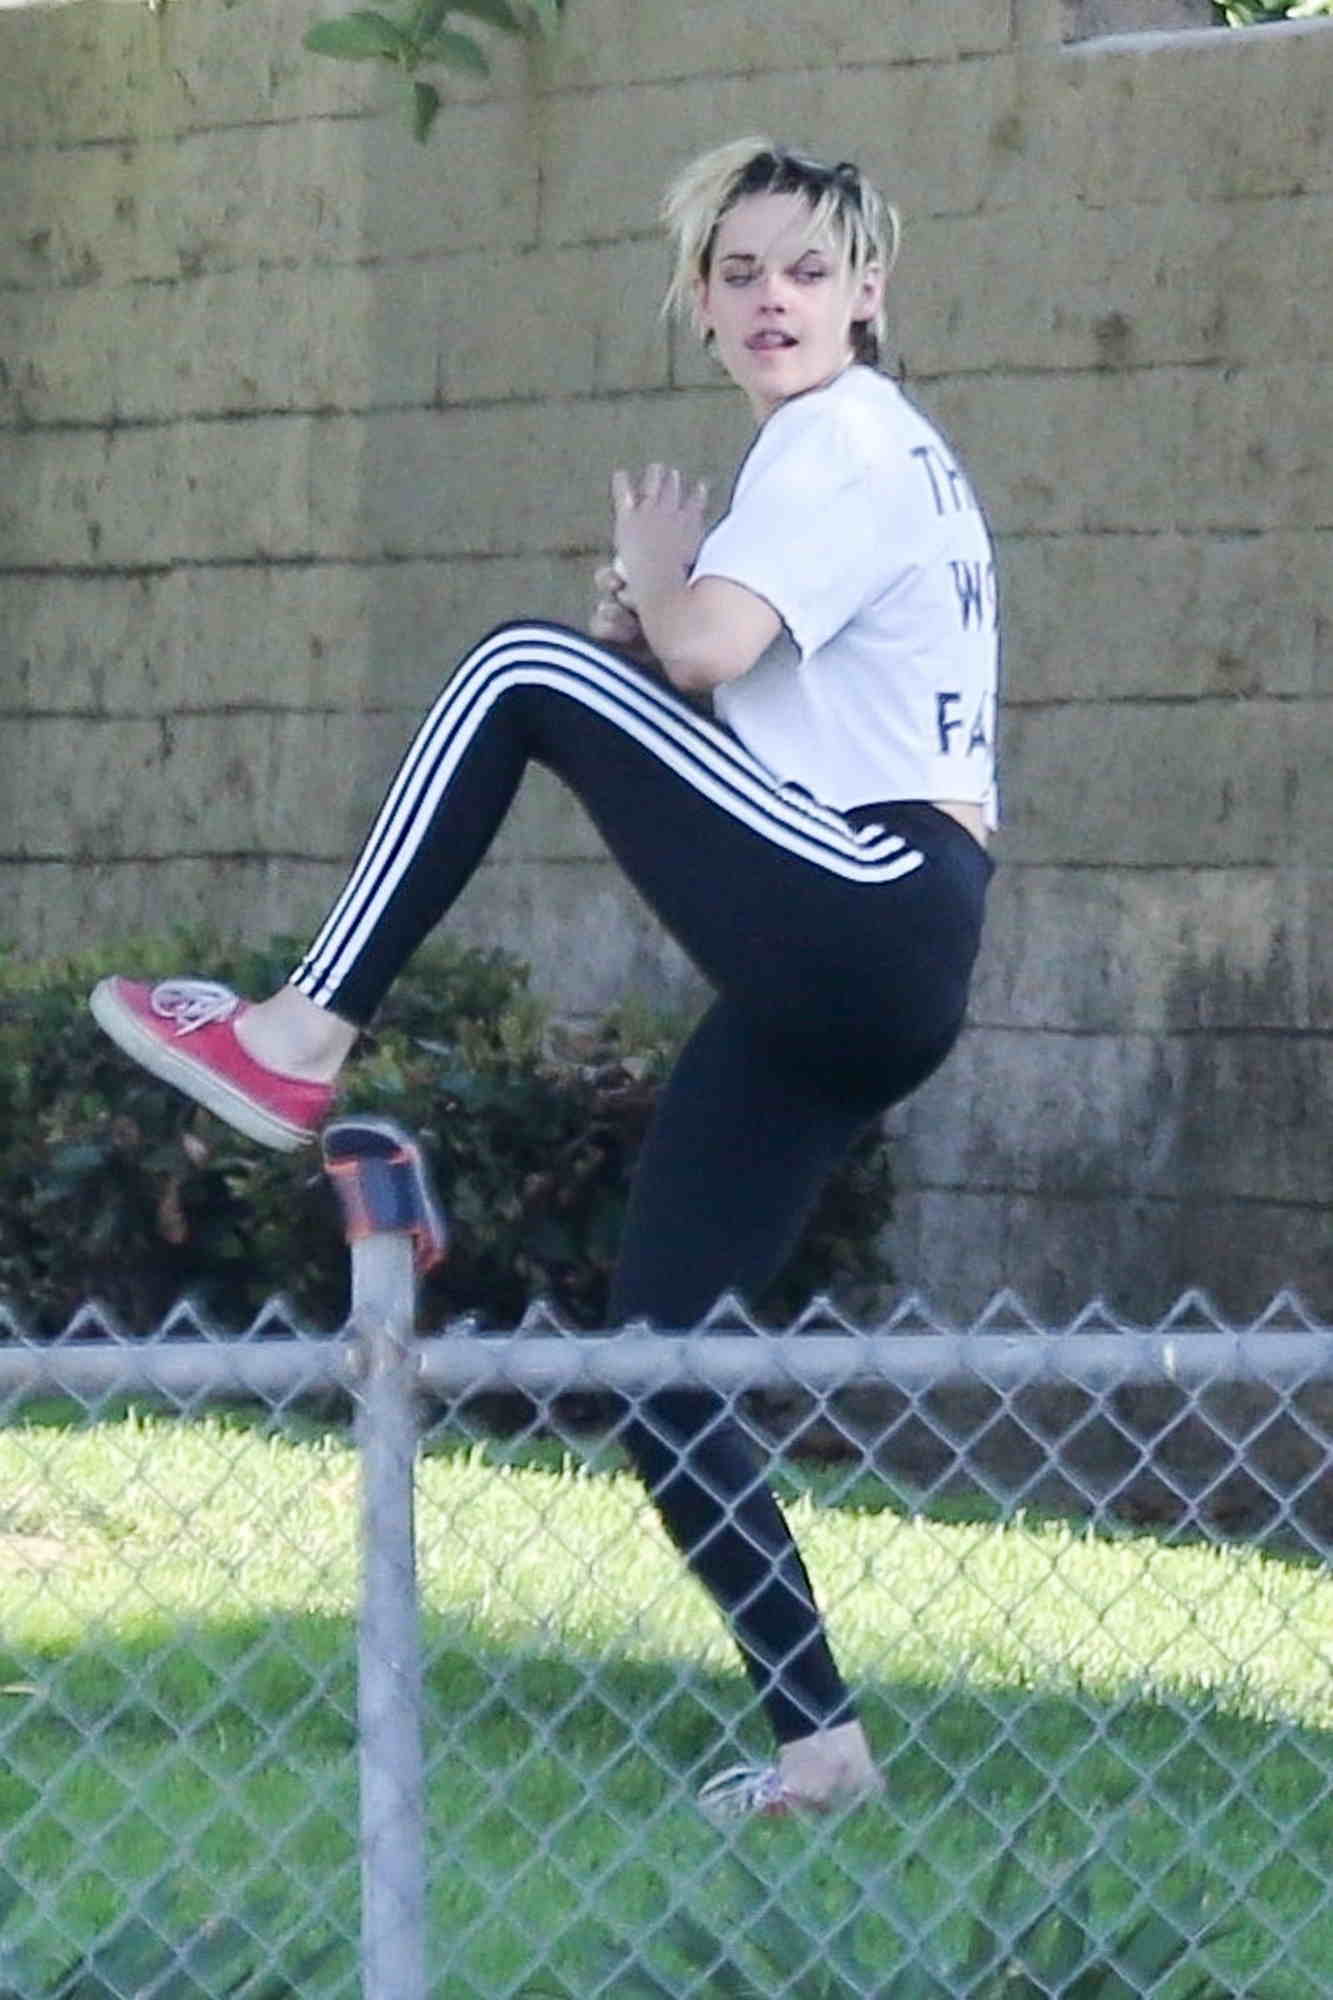 Kristen Stewart is seen playing Softball in Los Angeles on August 9th